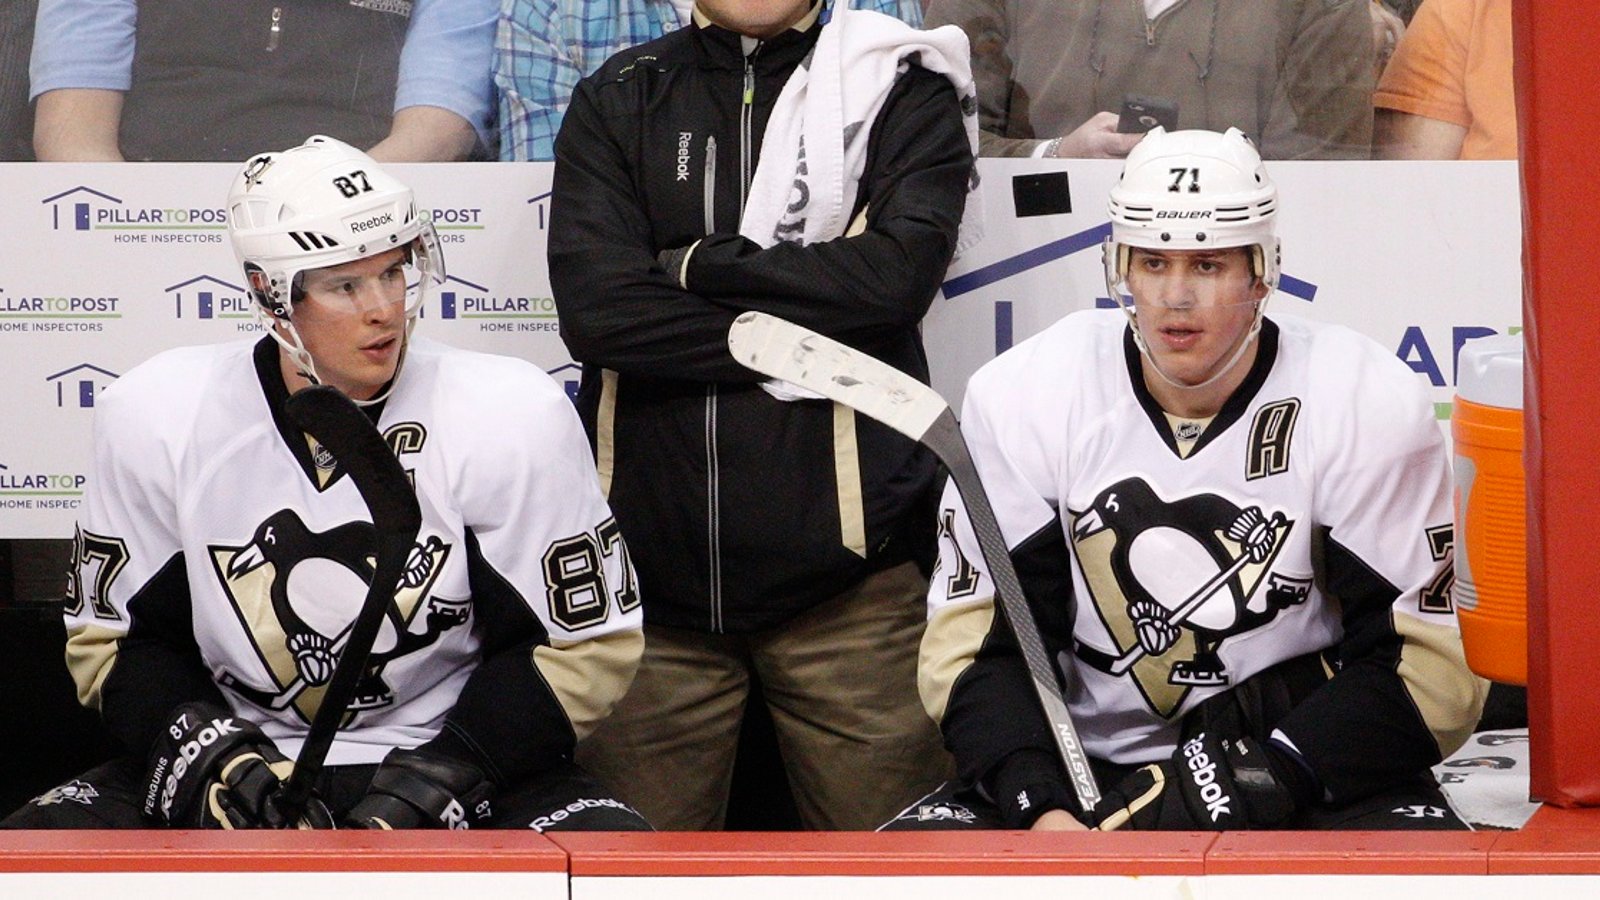 Sidney Crosby reveals how close the Penguins came to losing Malkin.